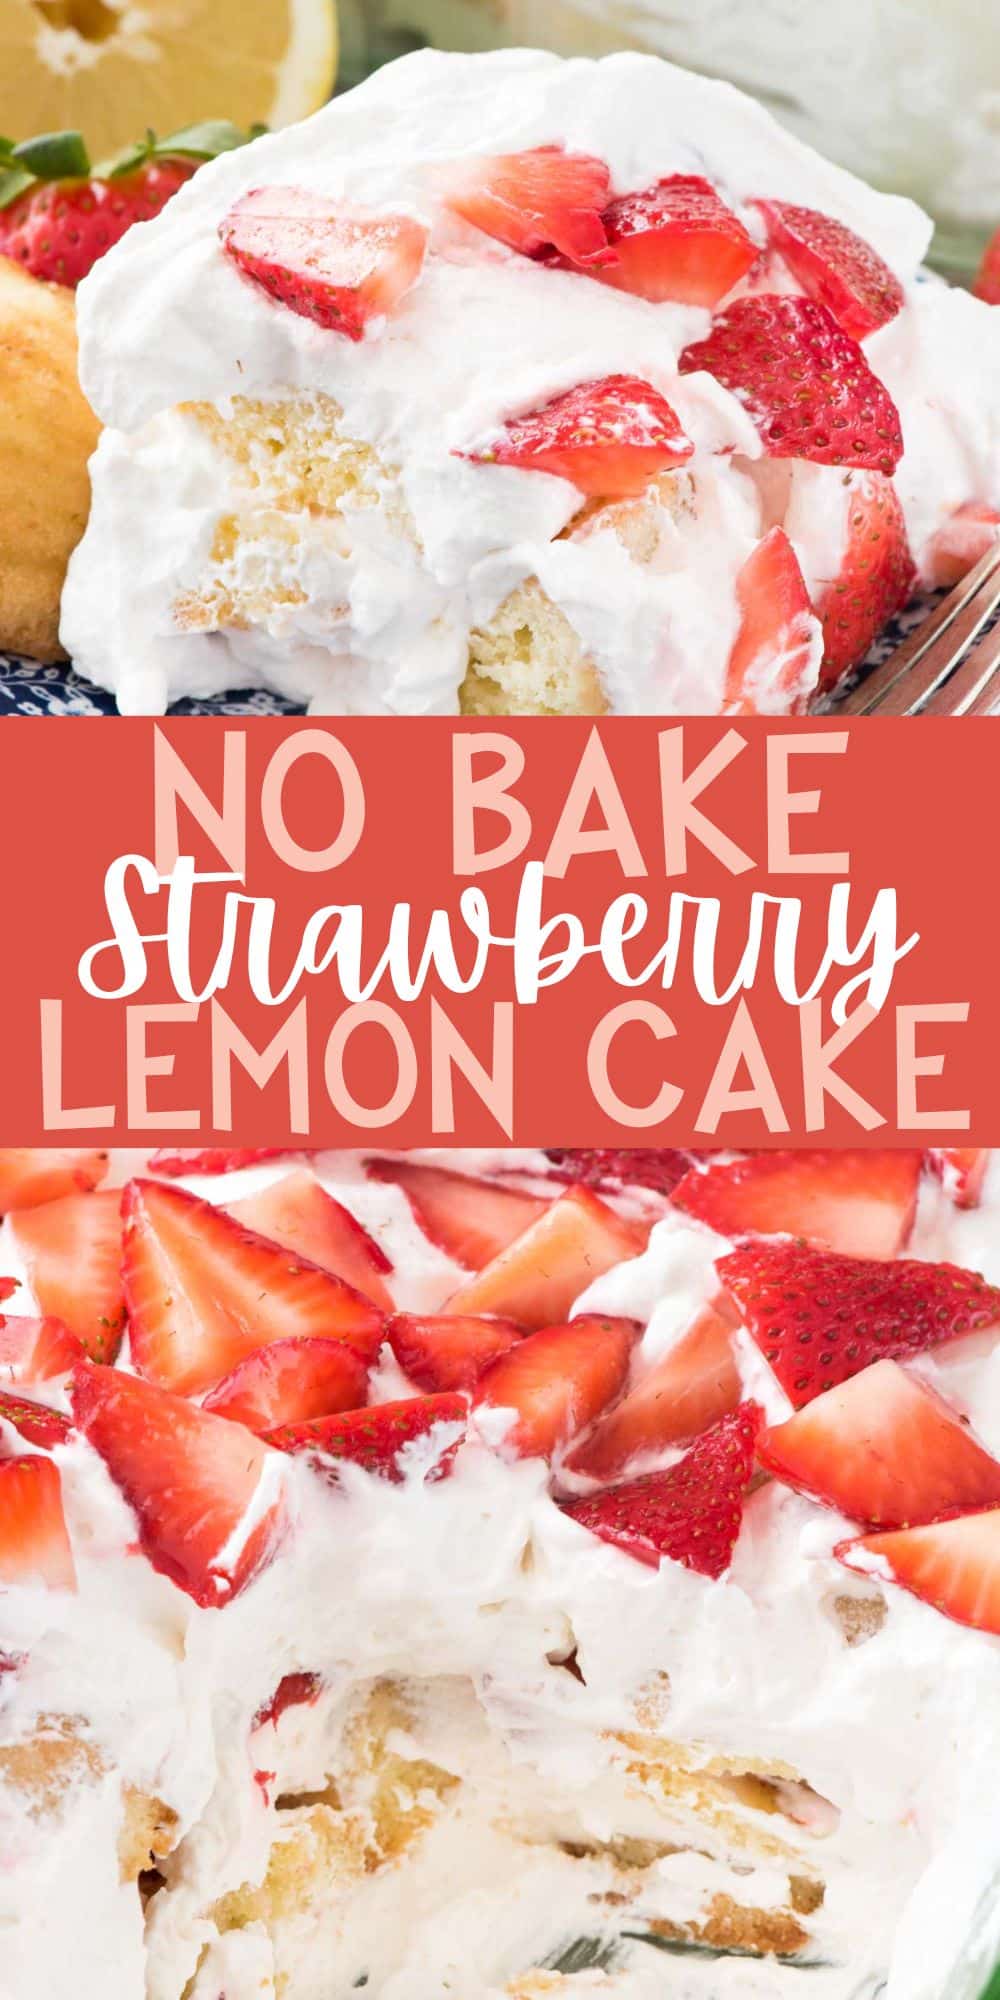 two photos of strawberry cake topped with whipped cream and strawberries on top with words on the image.